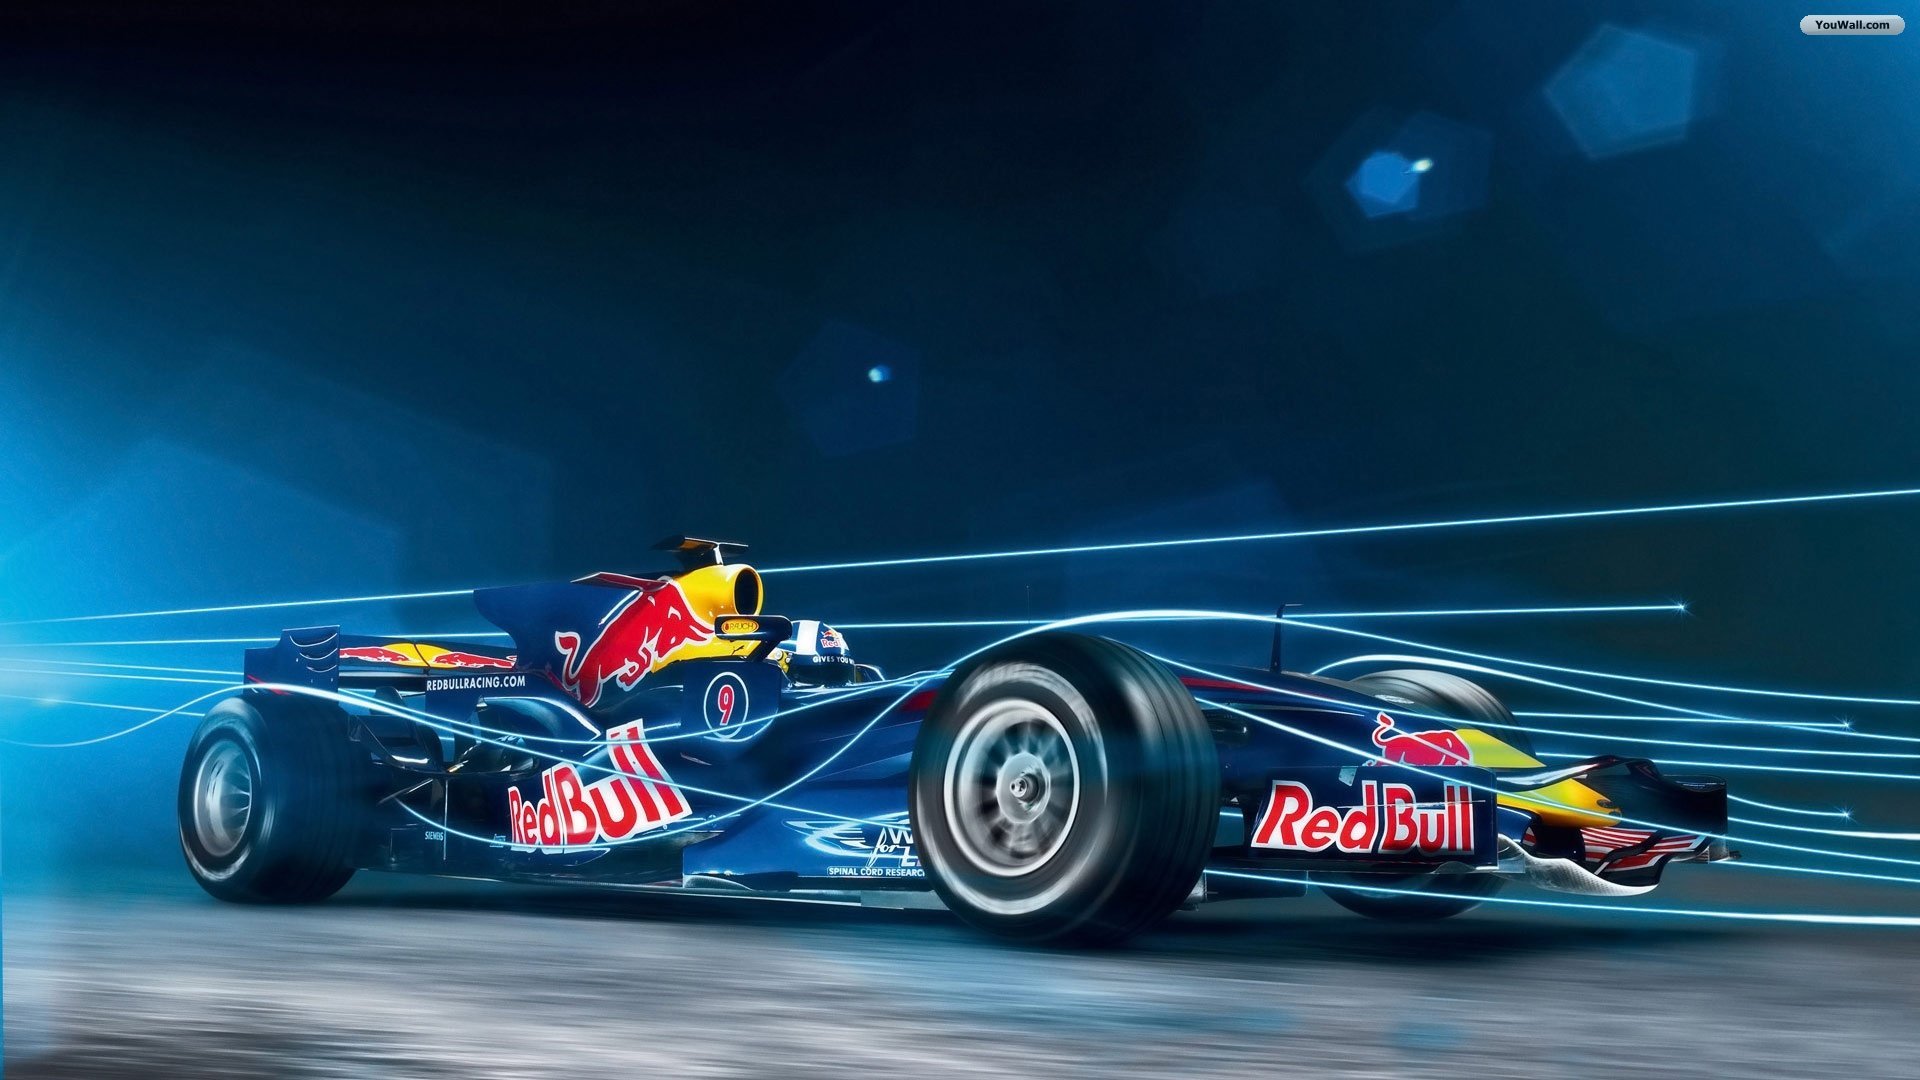 Comment to Over 50 Formula One Cars F1 Wallpapers in HD For Free